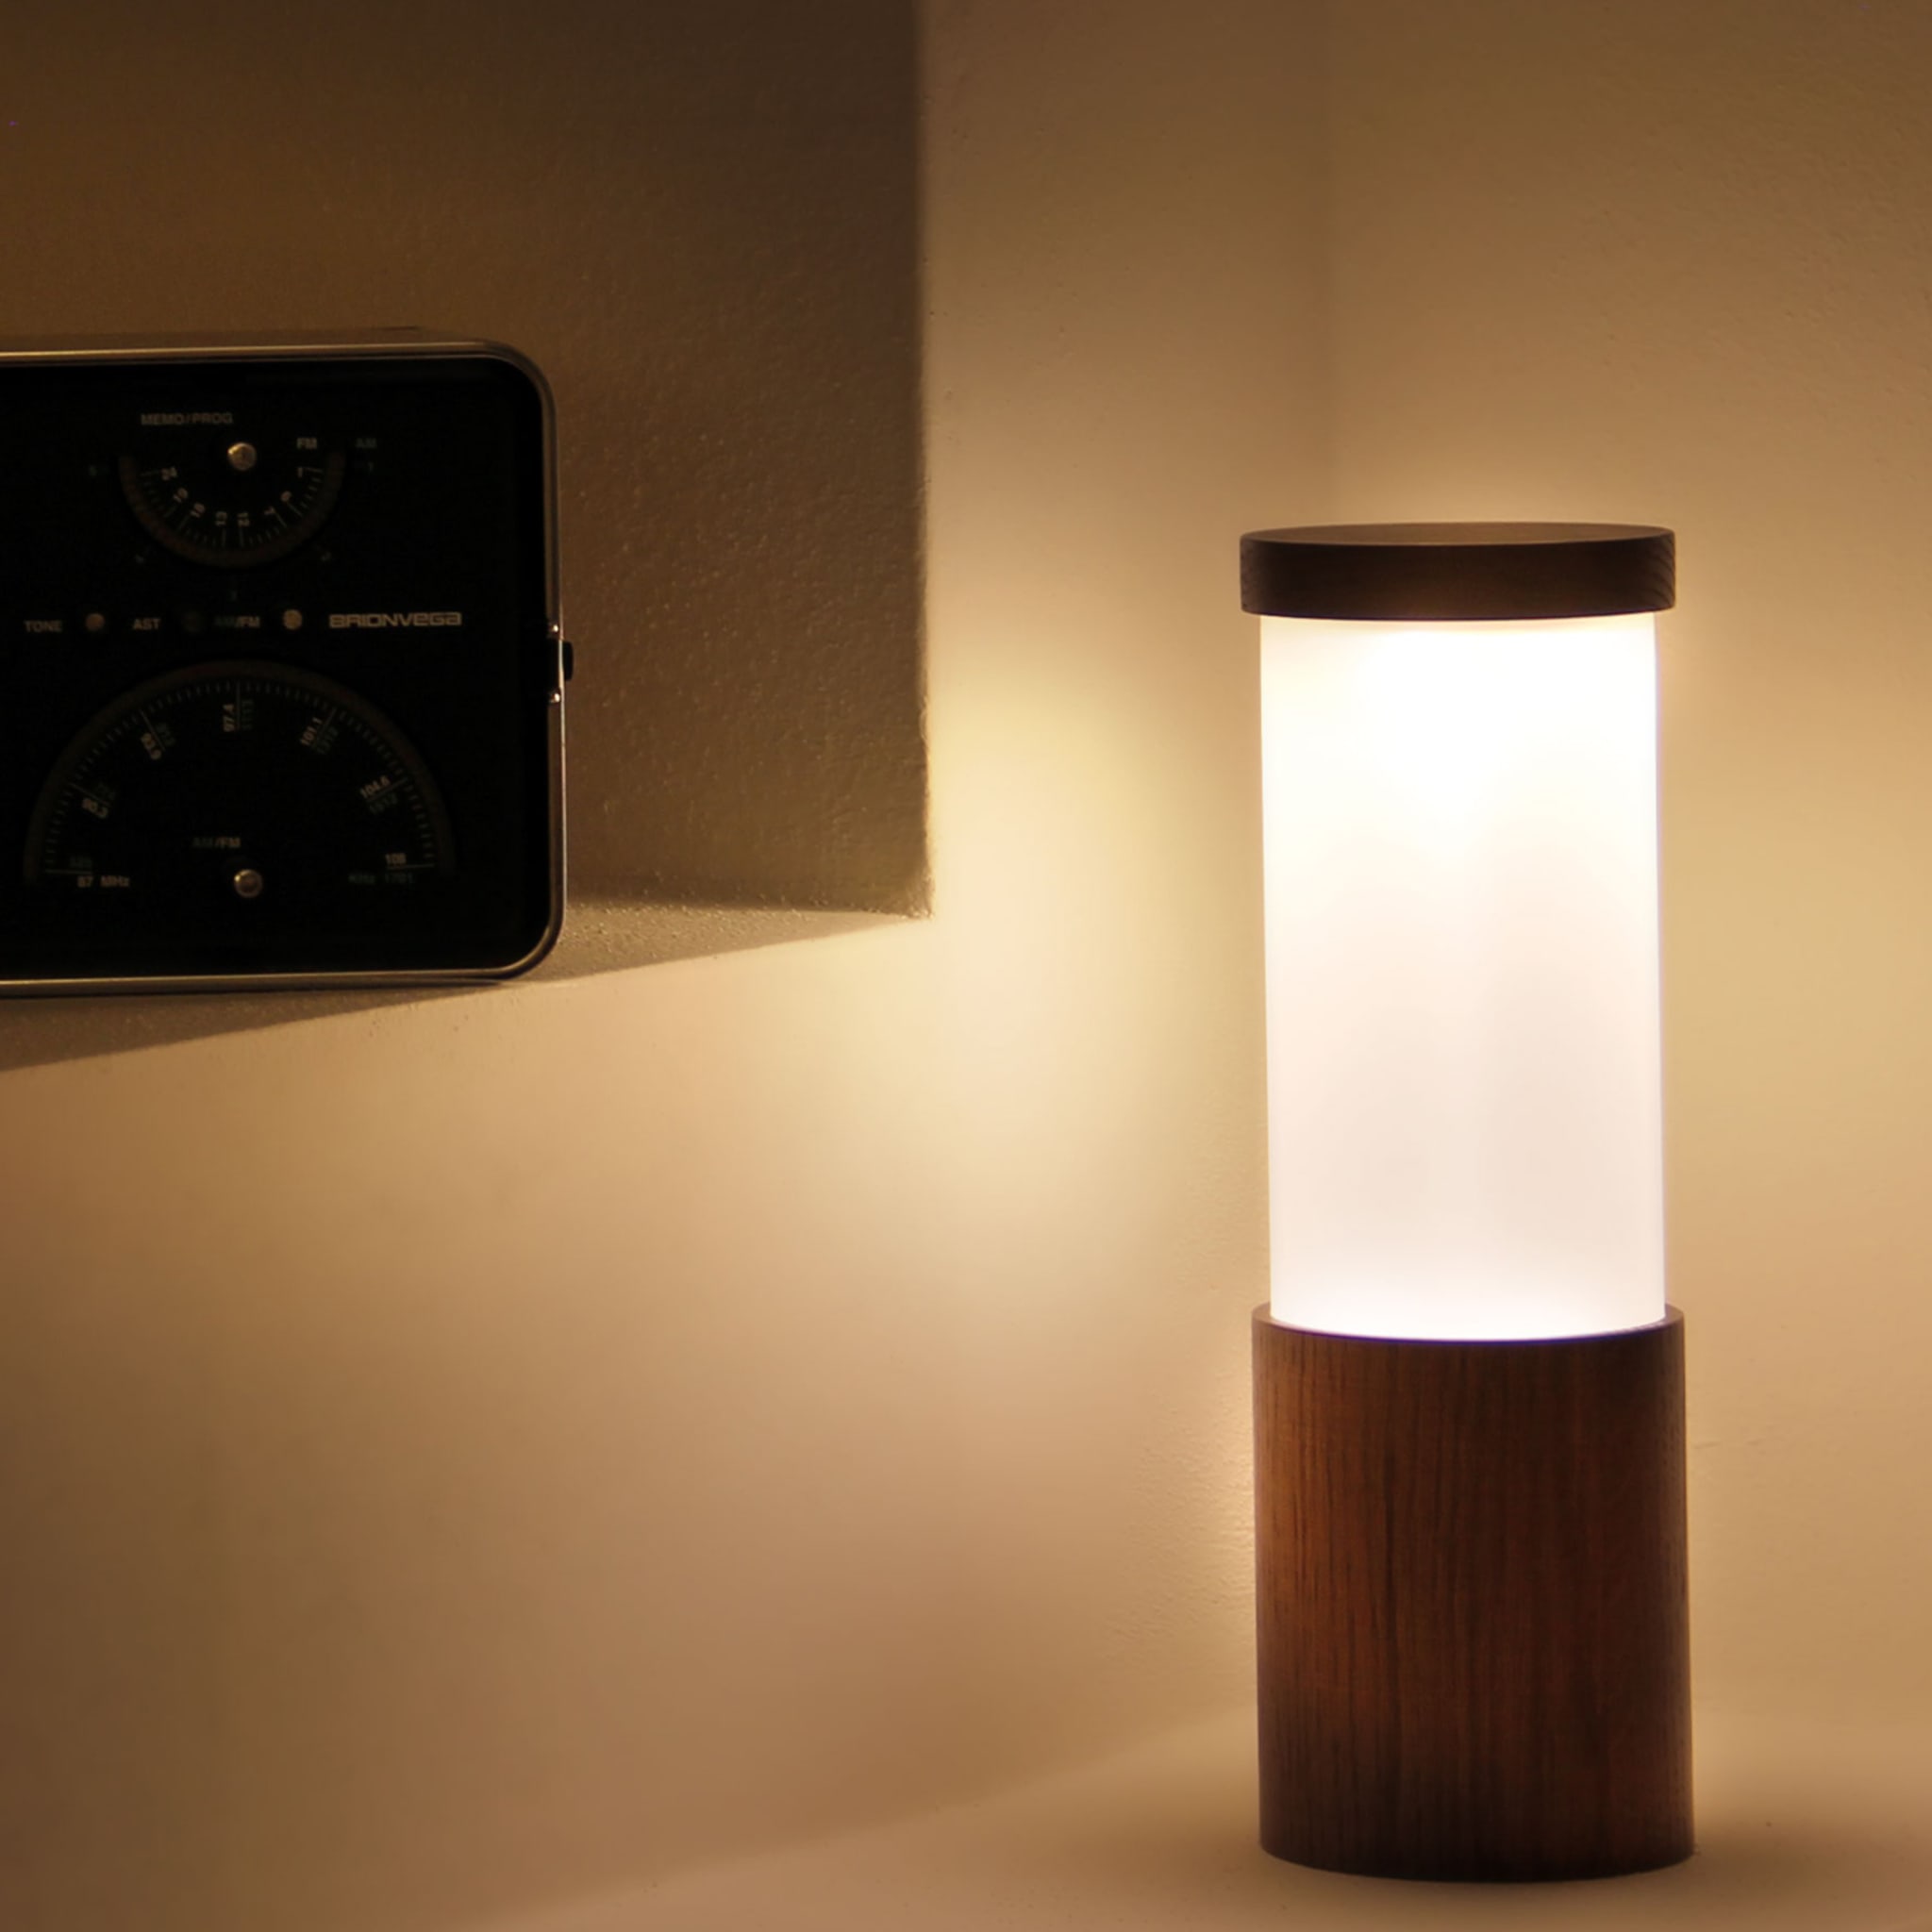 Tubino Noce Table Lamp by Stefano Tabarin - Alternative view 2